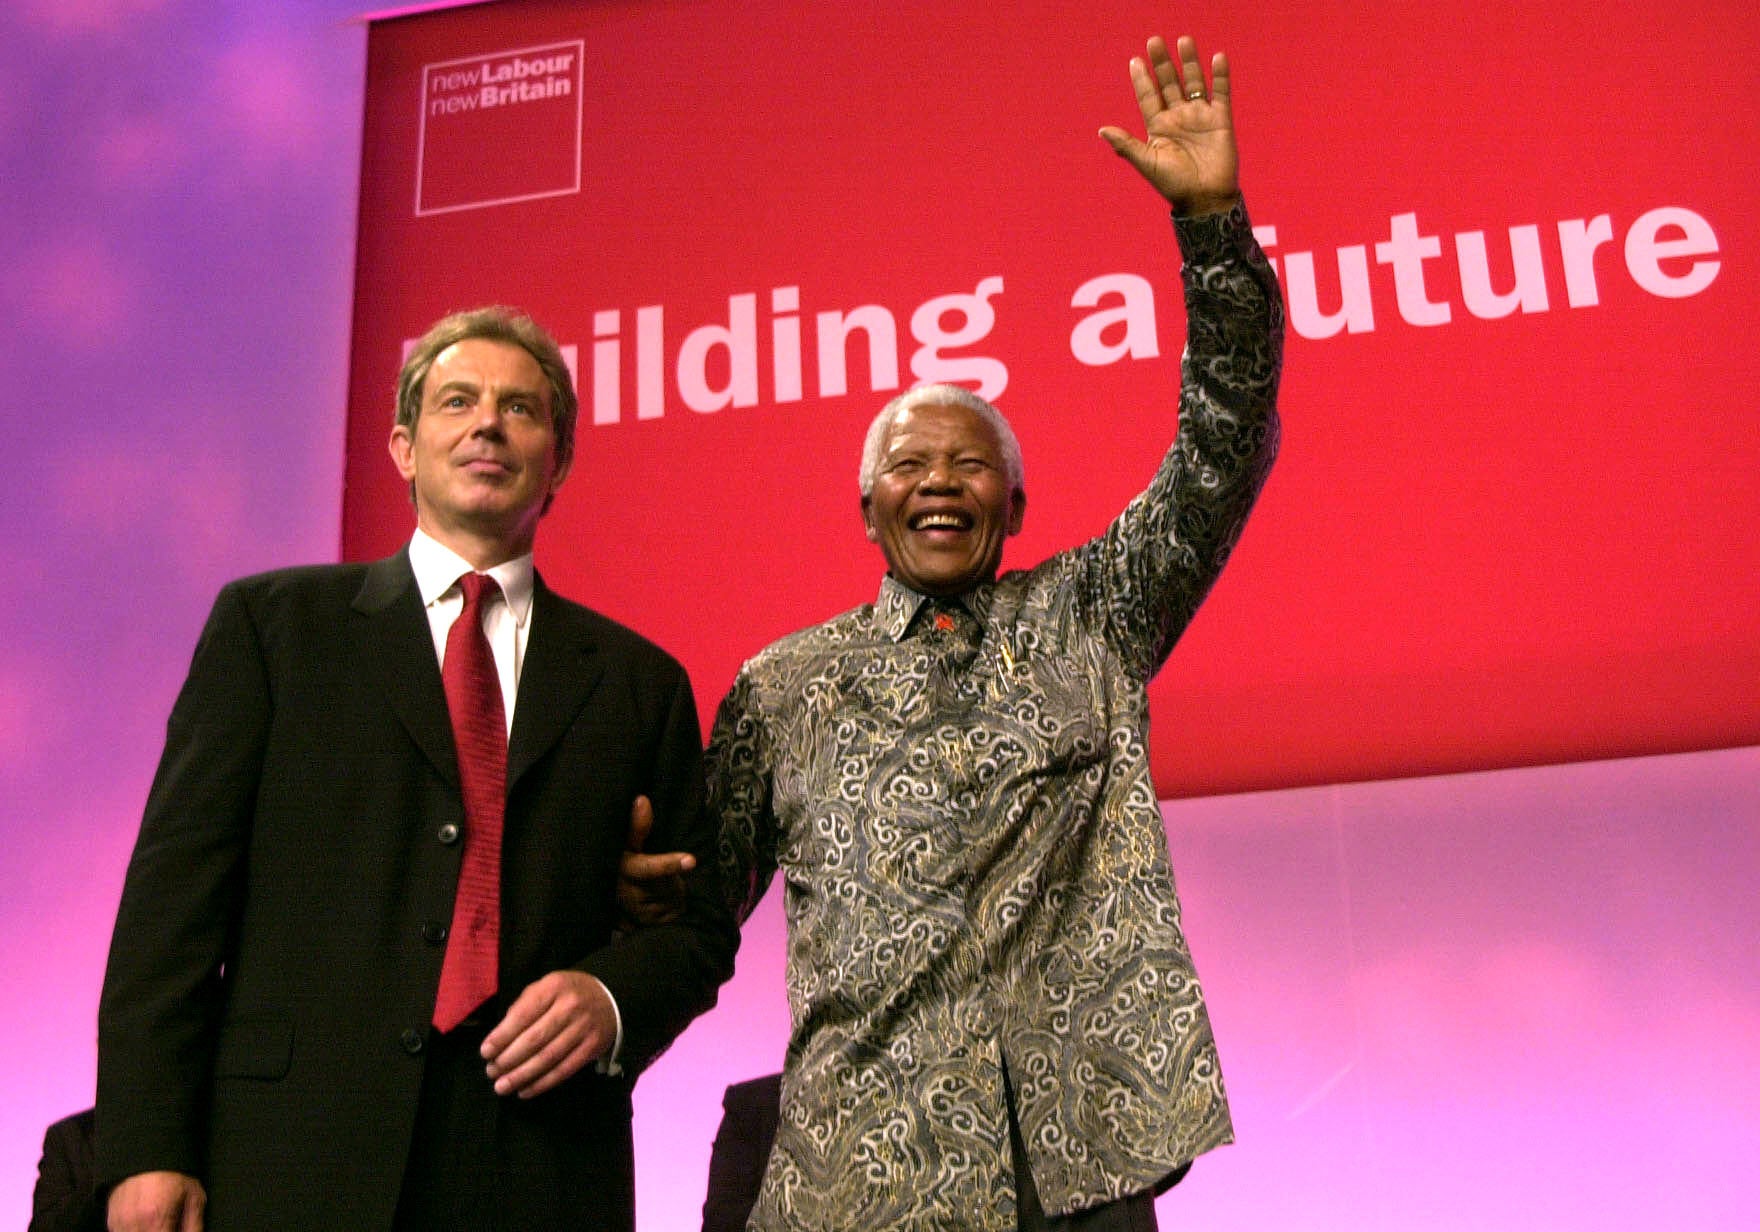 Nelson Mandela was among the celebrities who helped give Blair-era events their razzmatazz